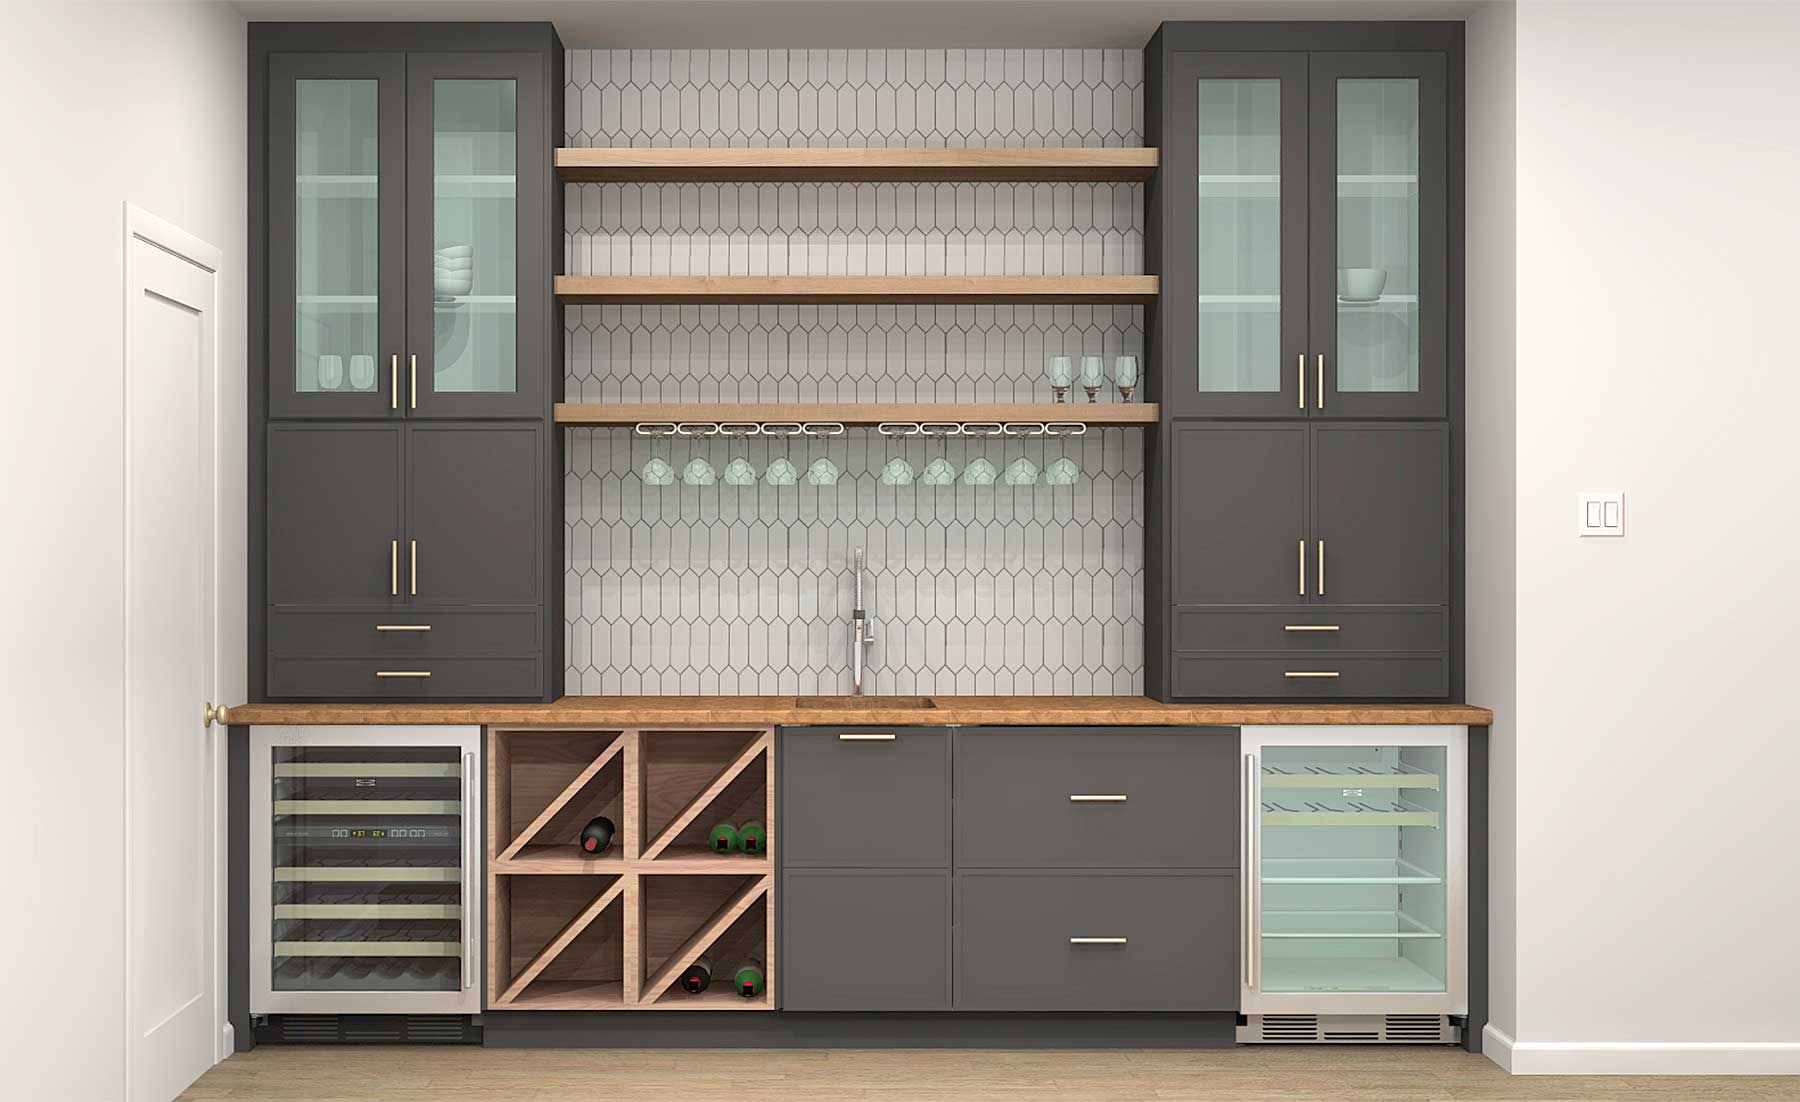 Verdachte Menda City nep Two Bar Areas, Two Different Designs with IKEA Cabinets